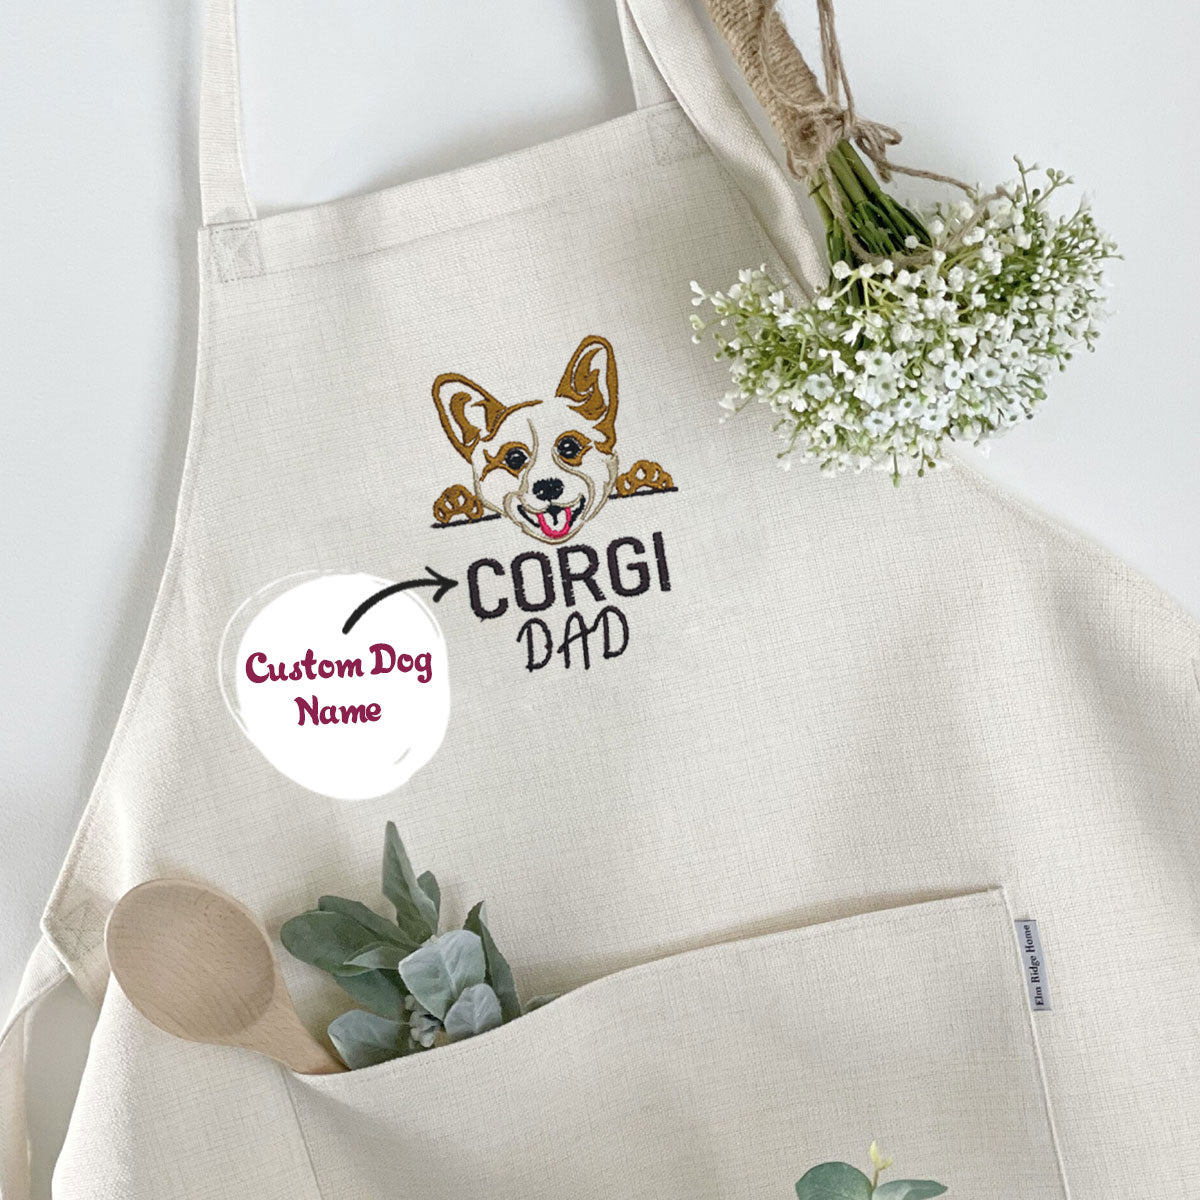 Custom Corgi Dog Dad Embroidered Apron, Personalized Apron with Dog Name, Best Gifts For Corgi Lovers